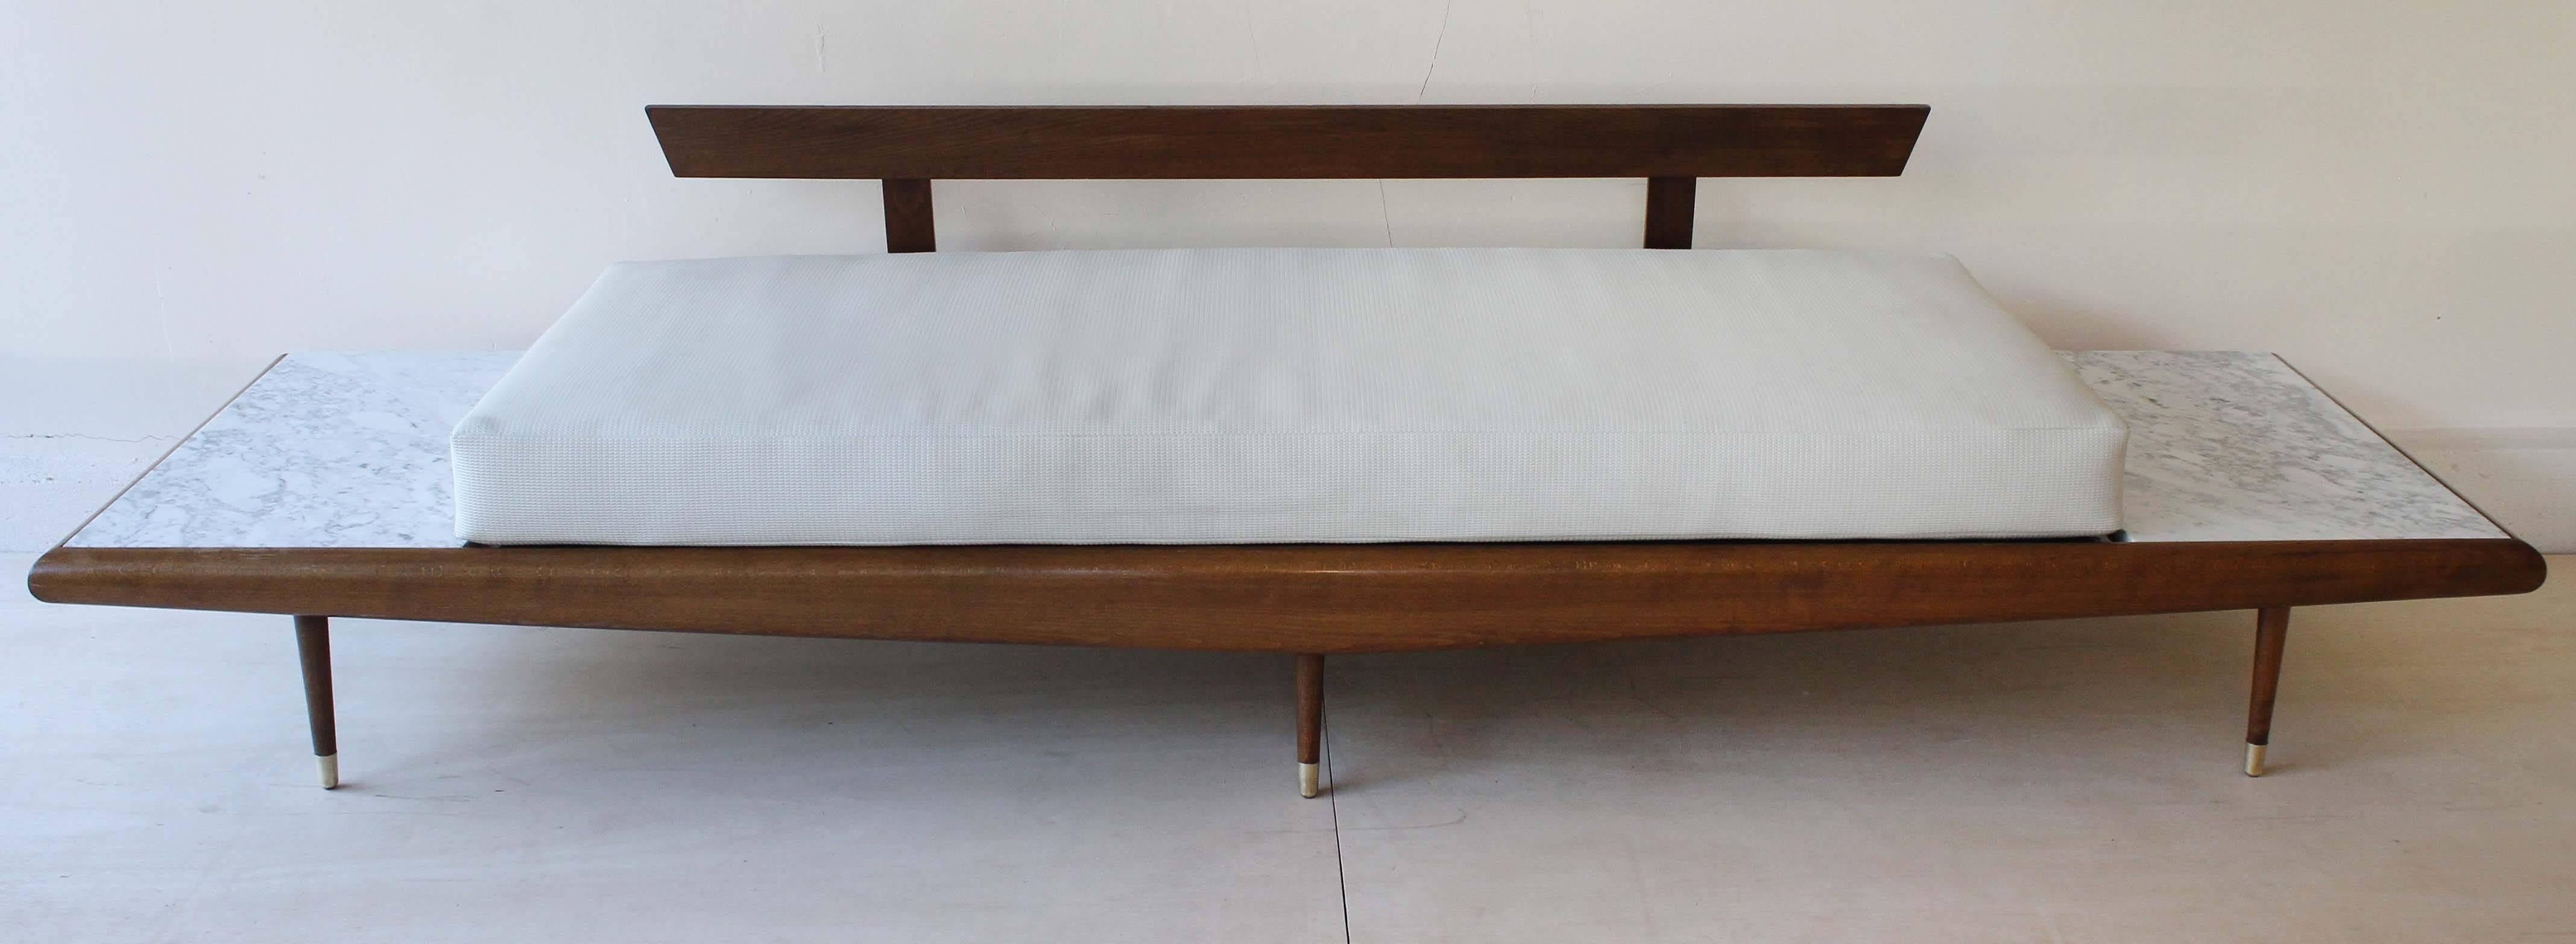 A versatile Adrian Pearsall / Craft Associates walnut and marble sofa, daybed or bench with brass boots. Shown here with 5